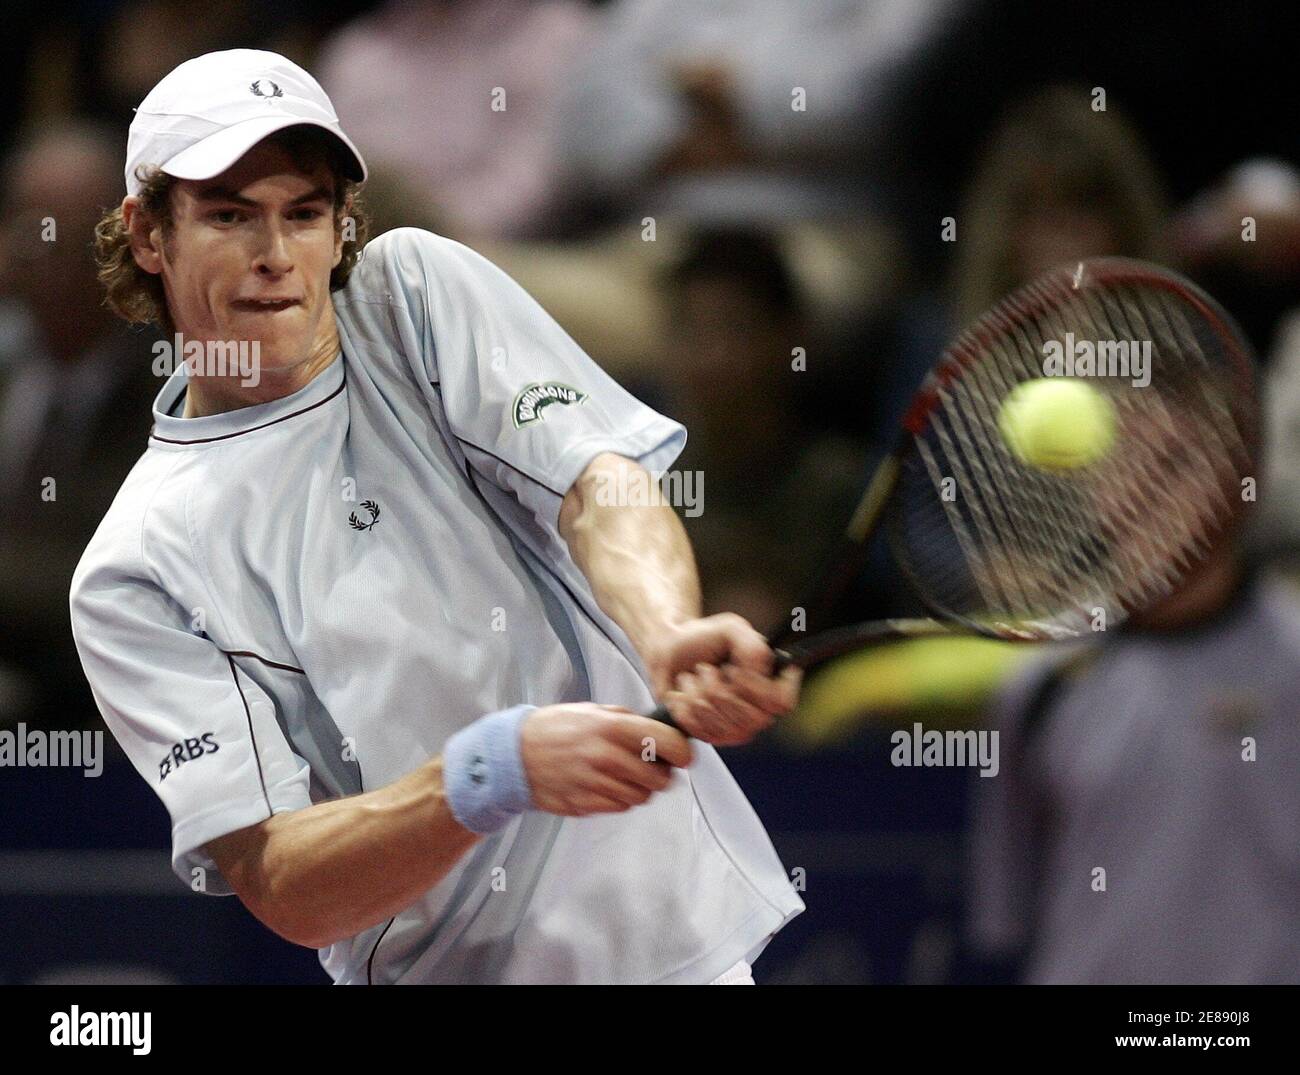 Britain's Andy Murray returns a backhand to his compatriot Tim Henman  during their first round match